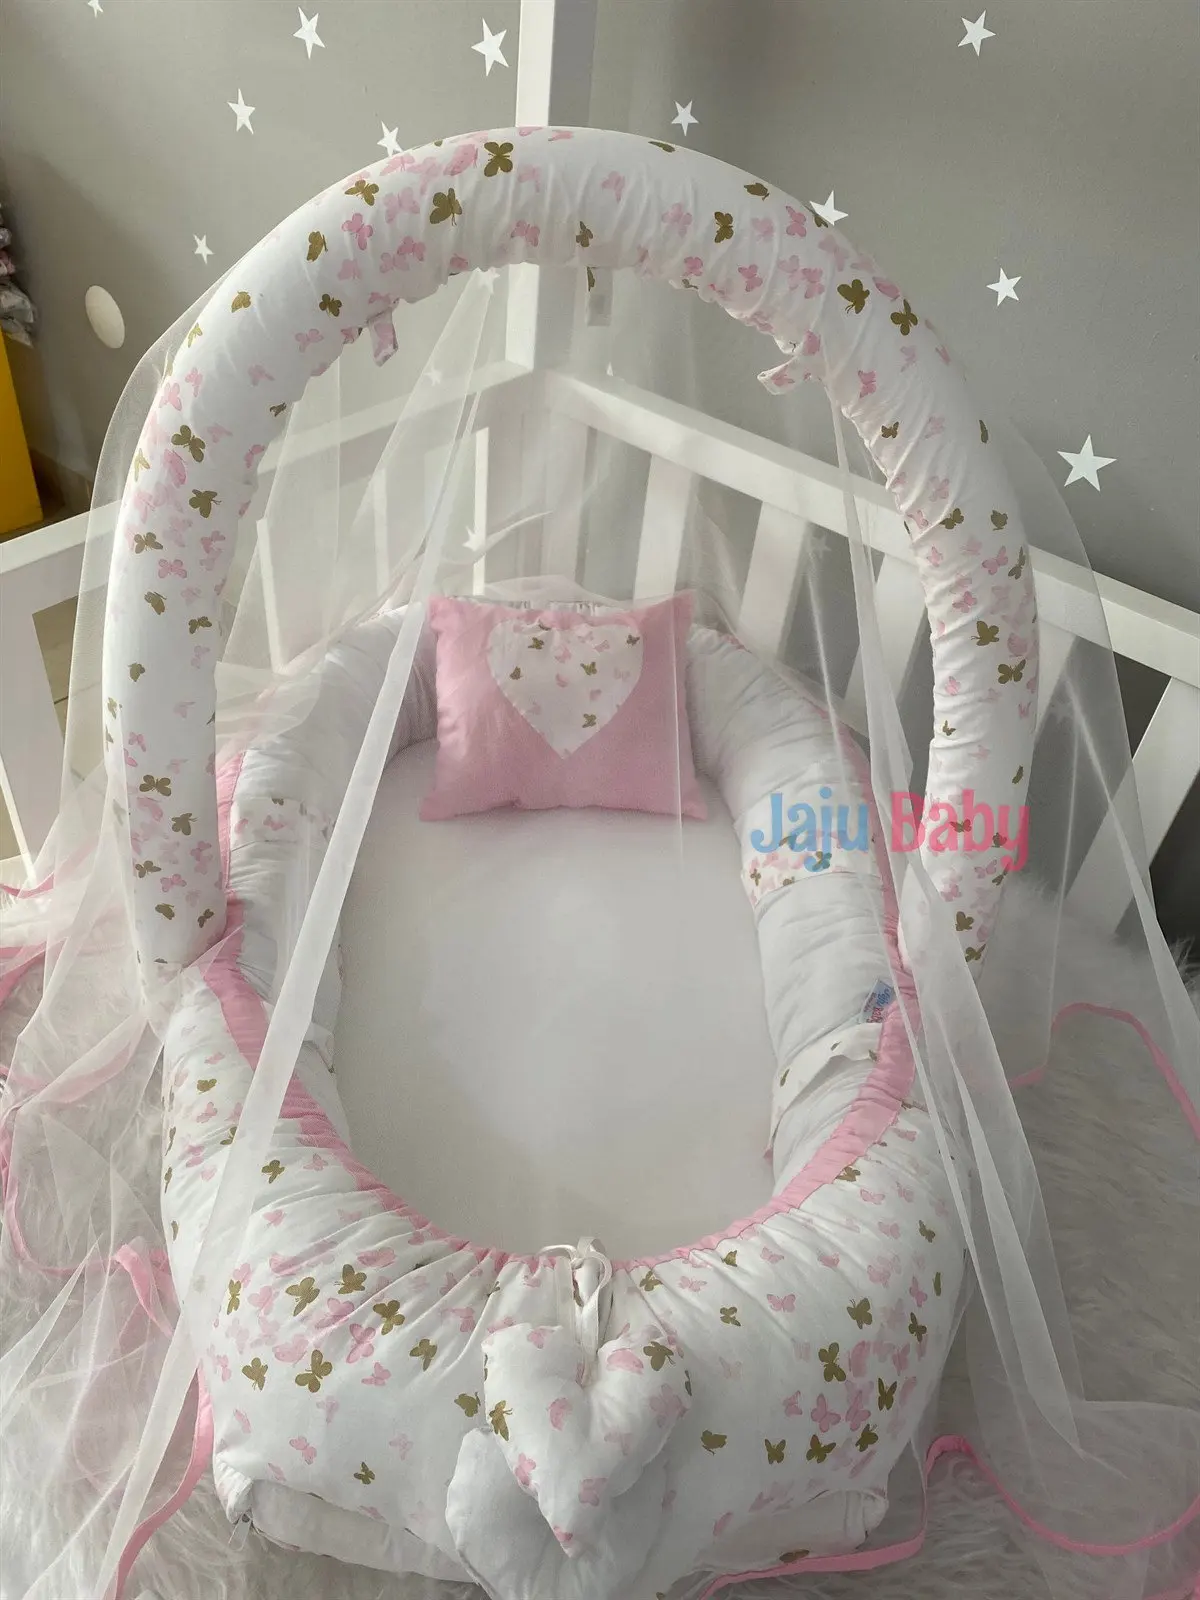 Handmade Pink Butterfly Patterned Mosquito Net and Toy Hanger Luxury Design Babynest